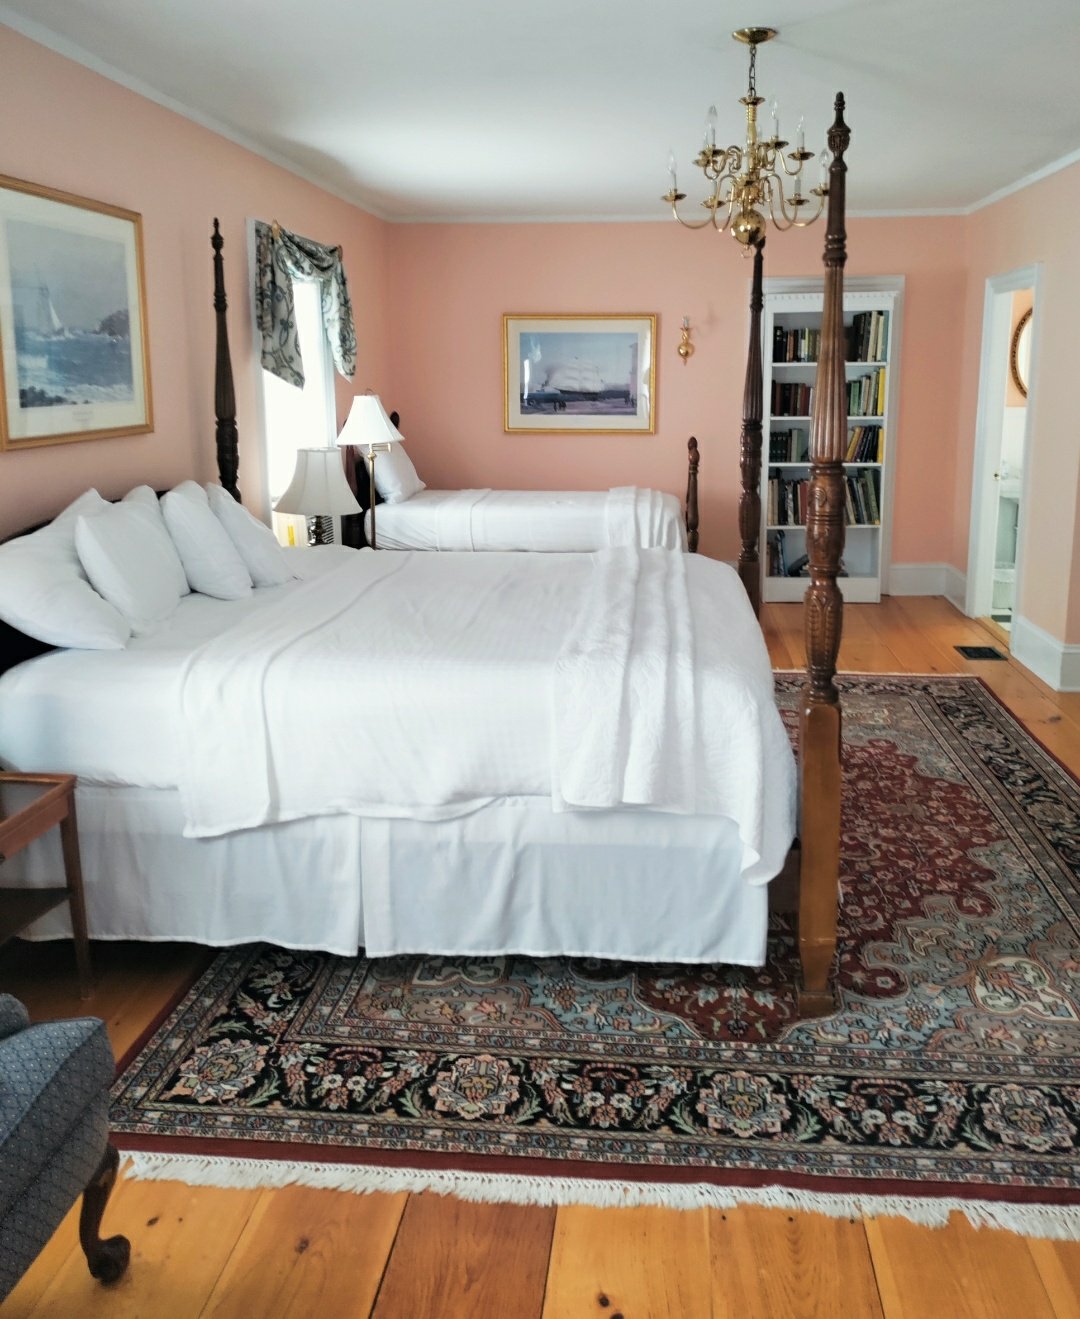 Traditional guest room at historic Kennebec Inn, Bath, Maine